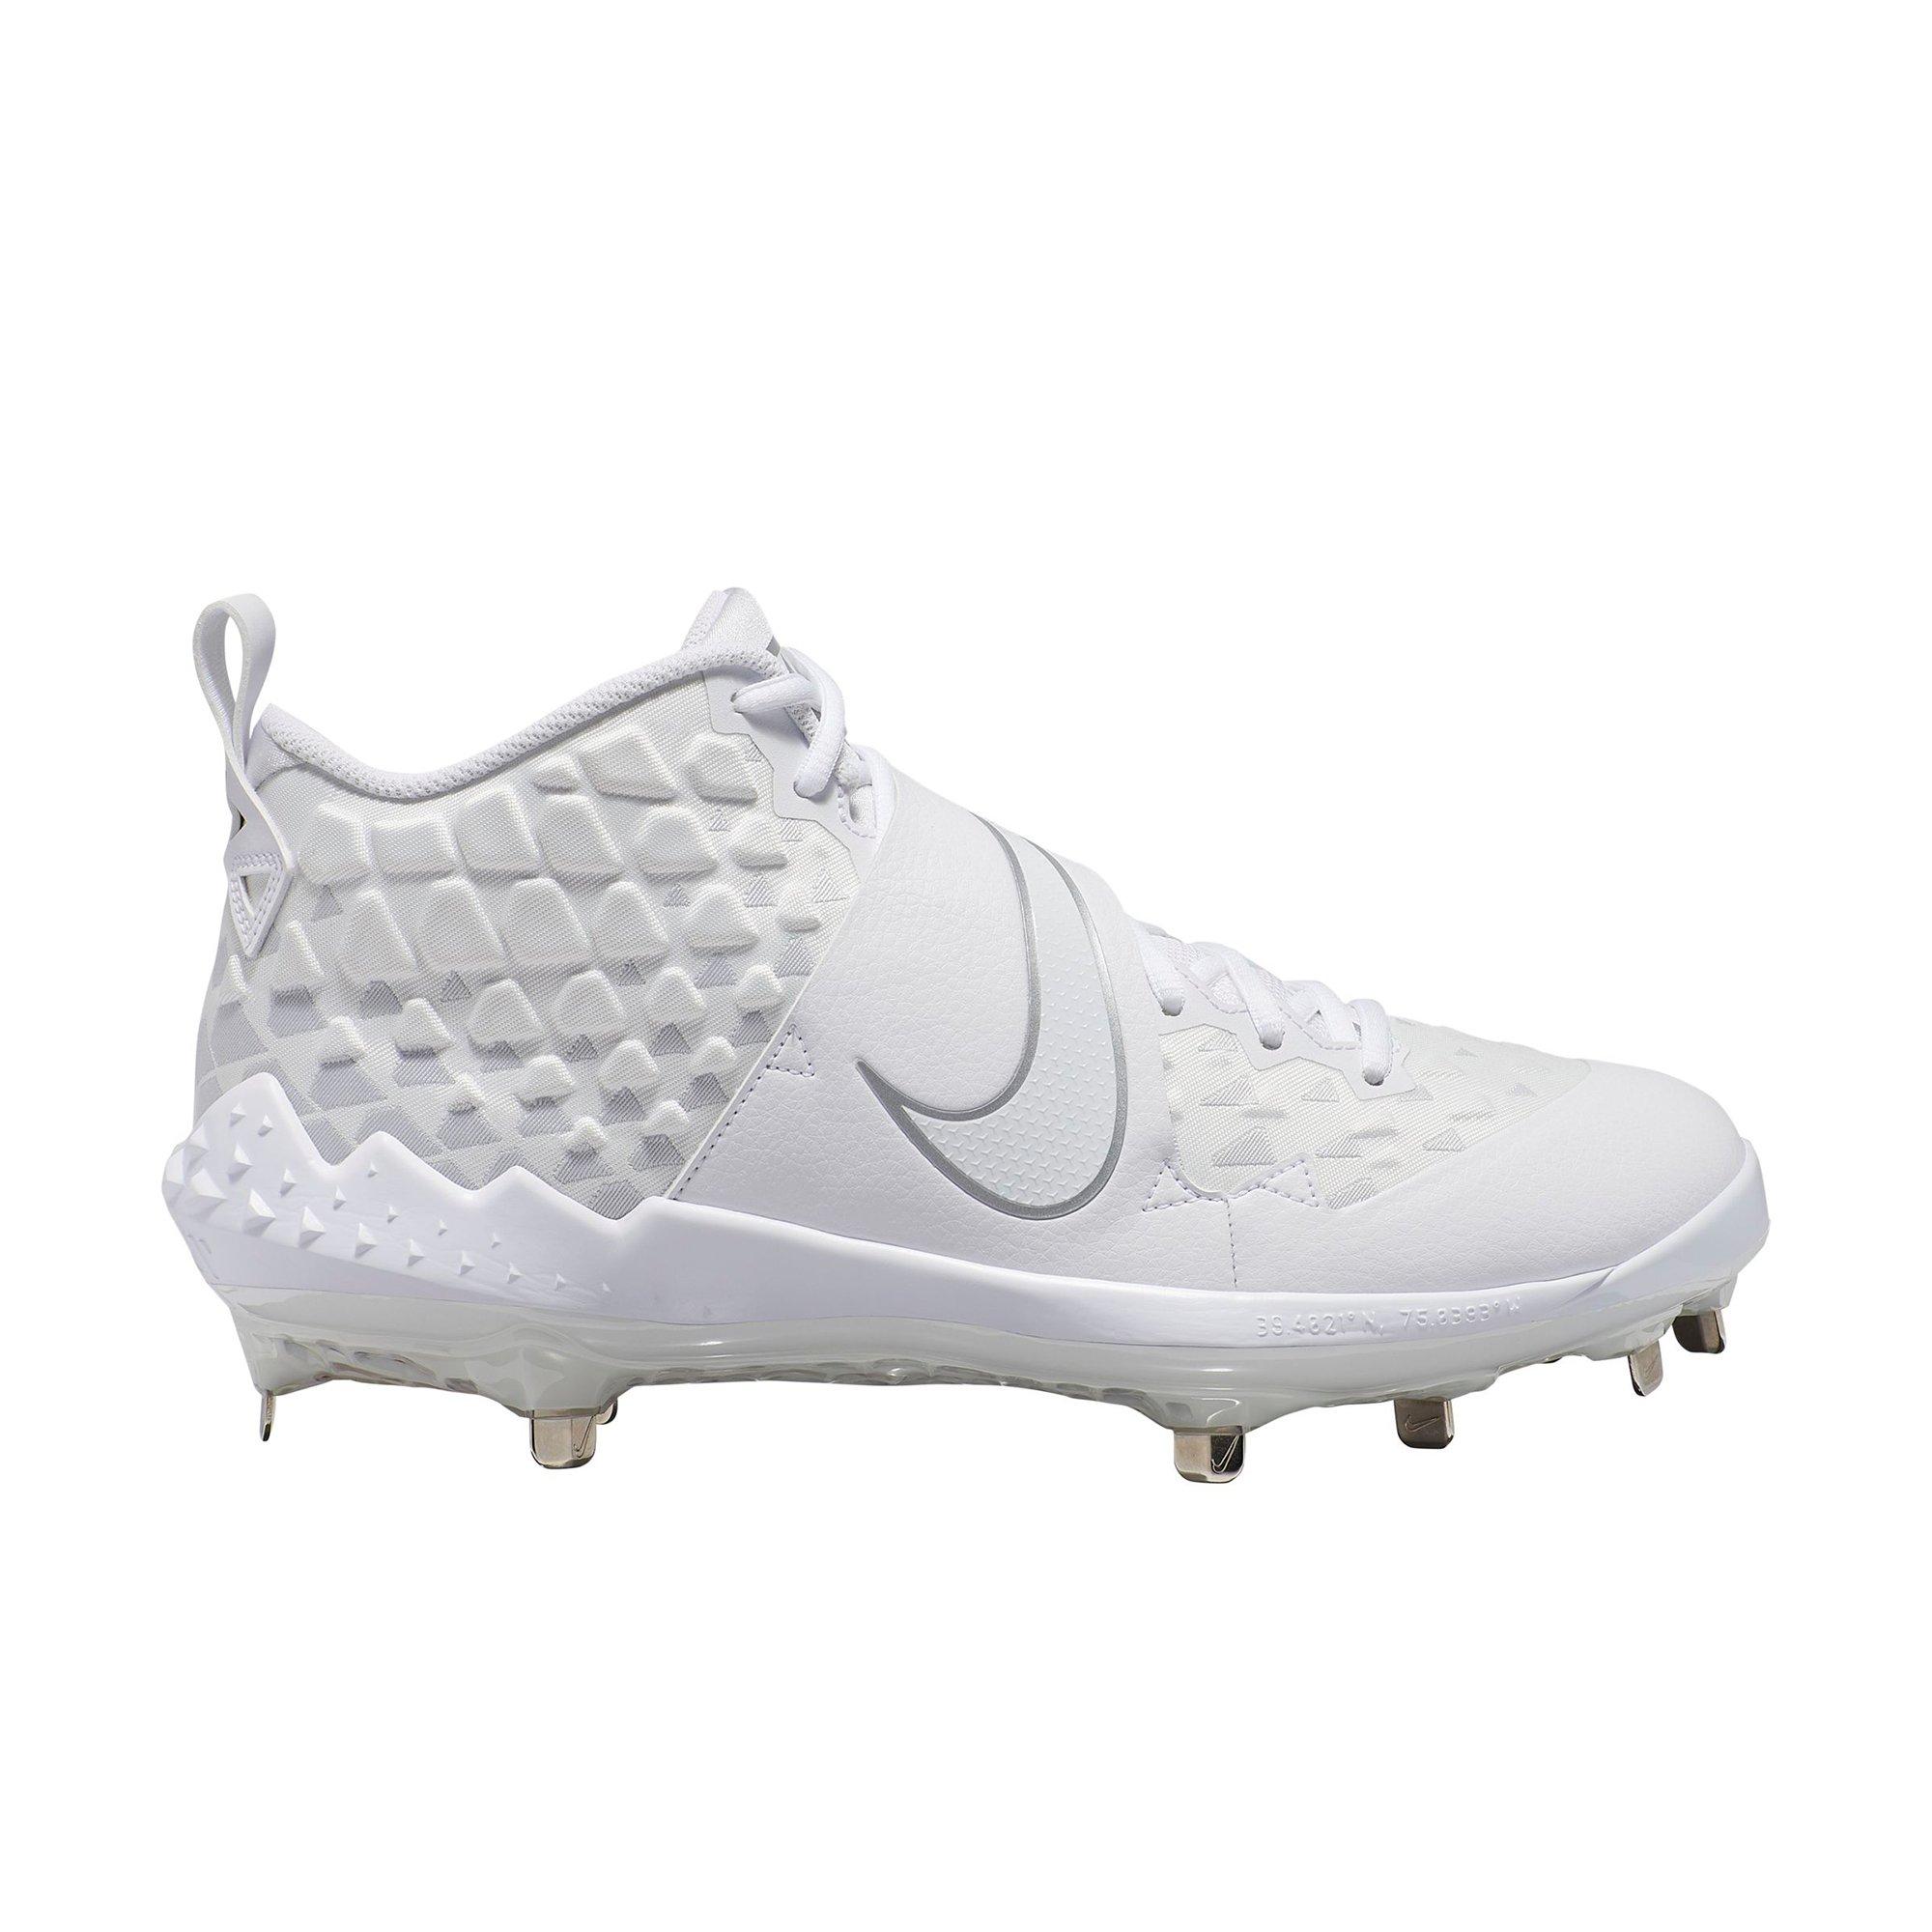 nike trout cleats - dsvdedommel 